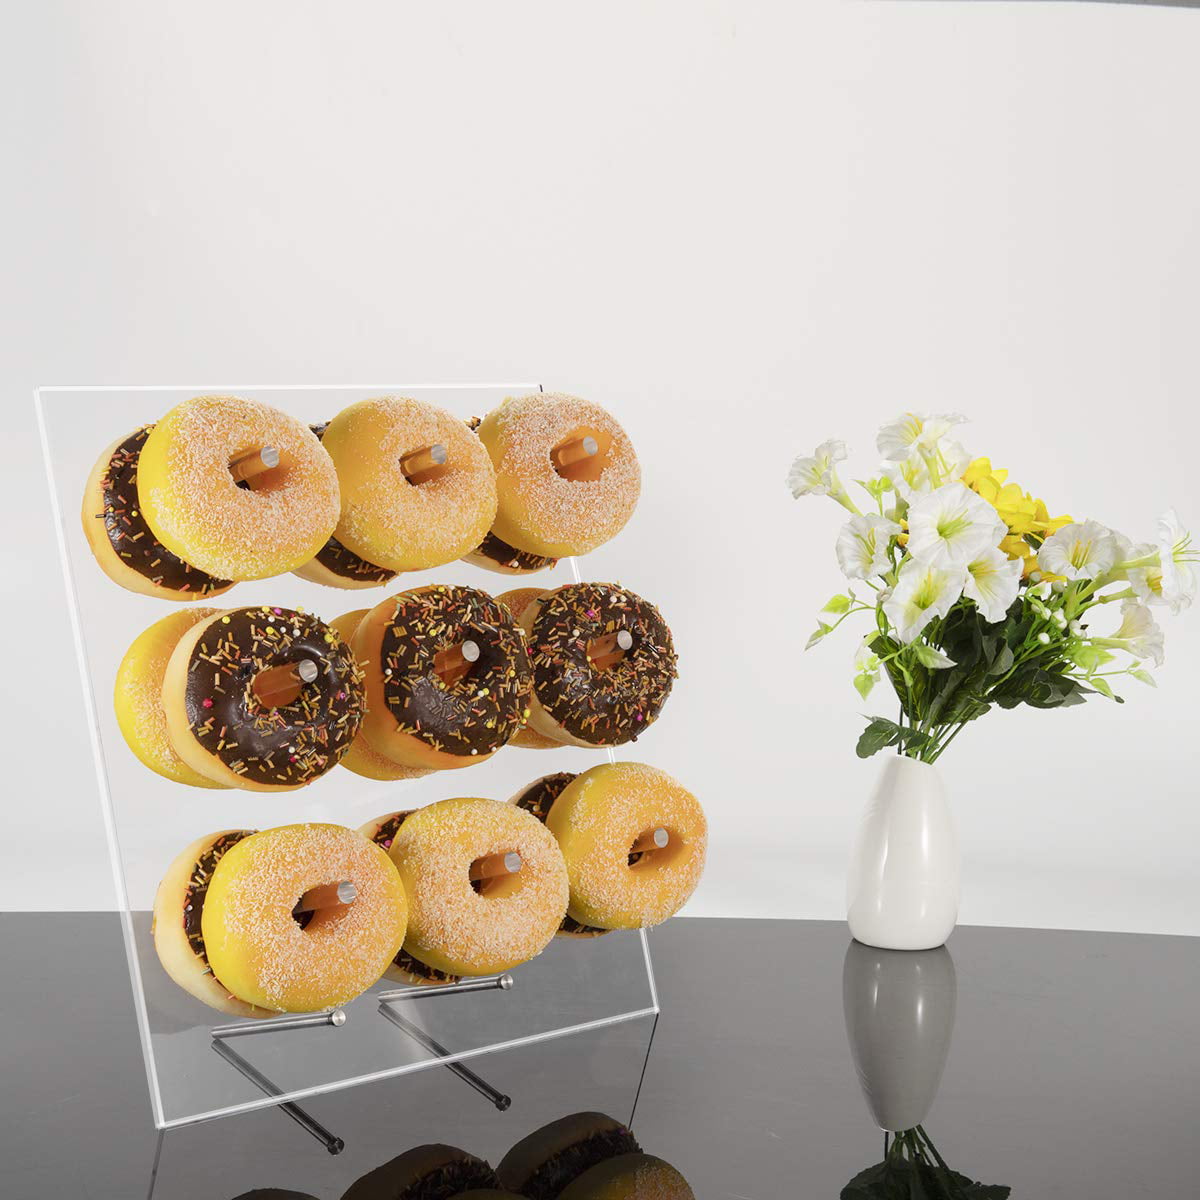 Brown Acrylic Donut Display Stand Reusable Clear Donut Holder Clear Donut Bagels Holders Reusable Rustic Doughnut Board Fits 9 Doughnuts for Wedding Christmas Graduation Birthday Party